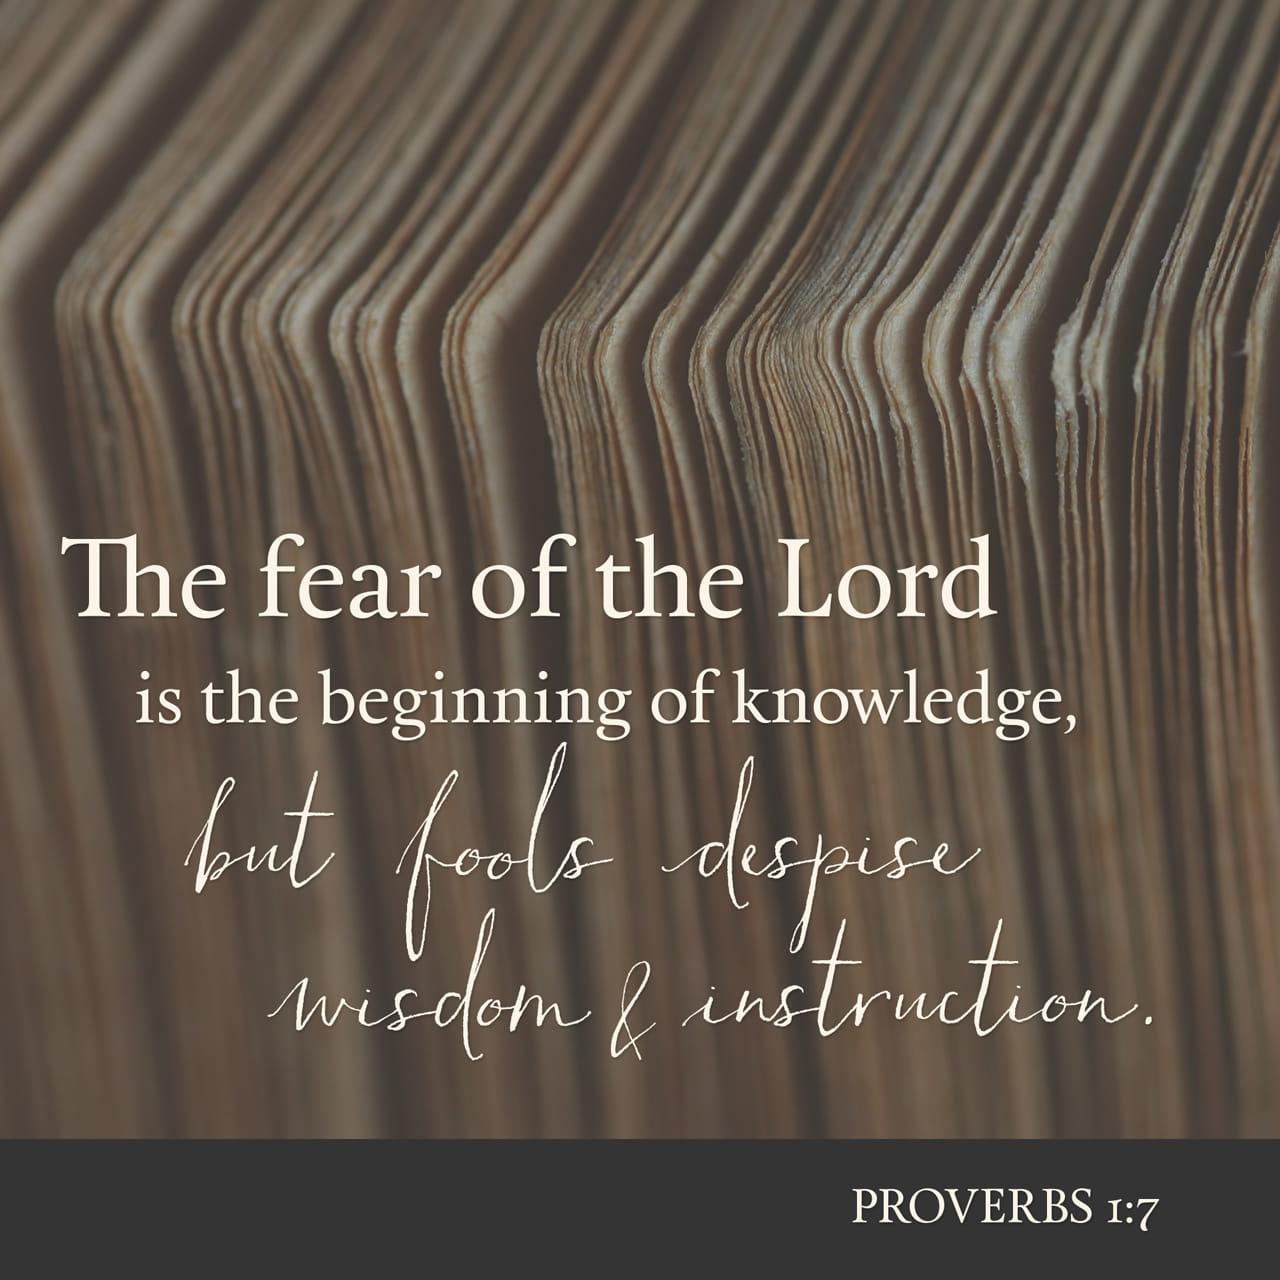 Bible Verse of the Day - day 153 - image 282 (Proverbs 1:7)